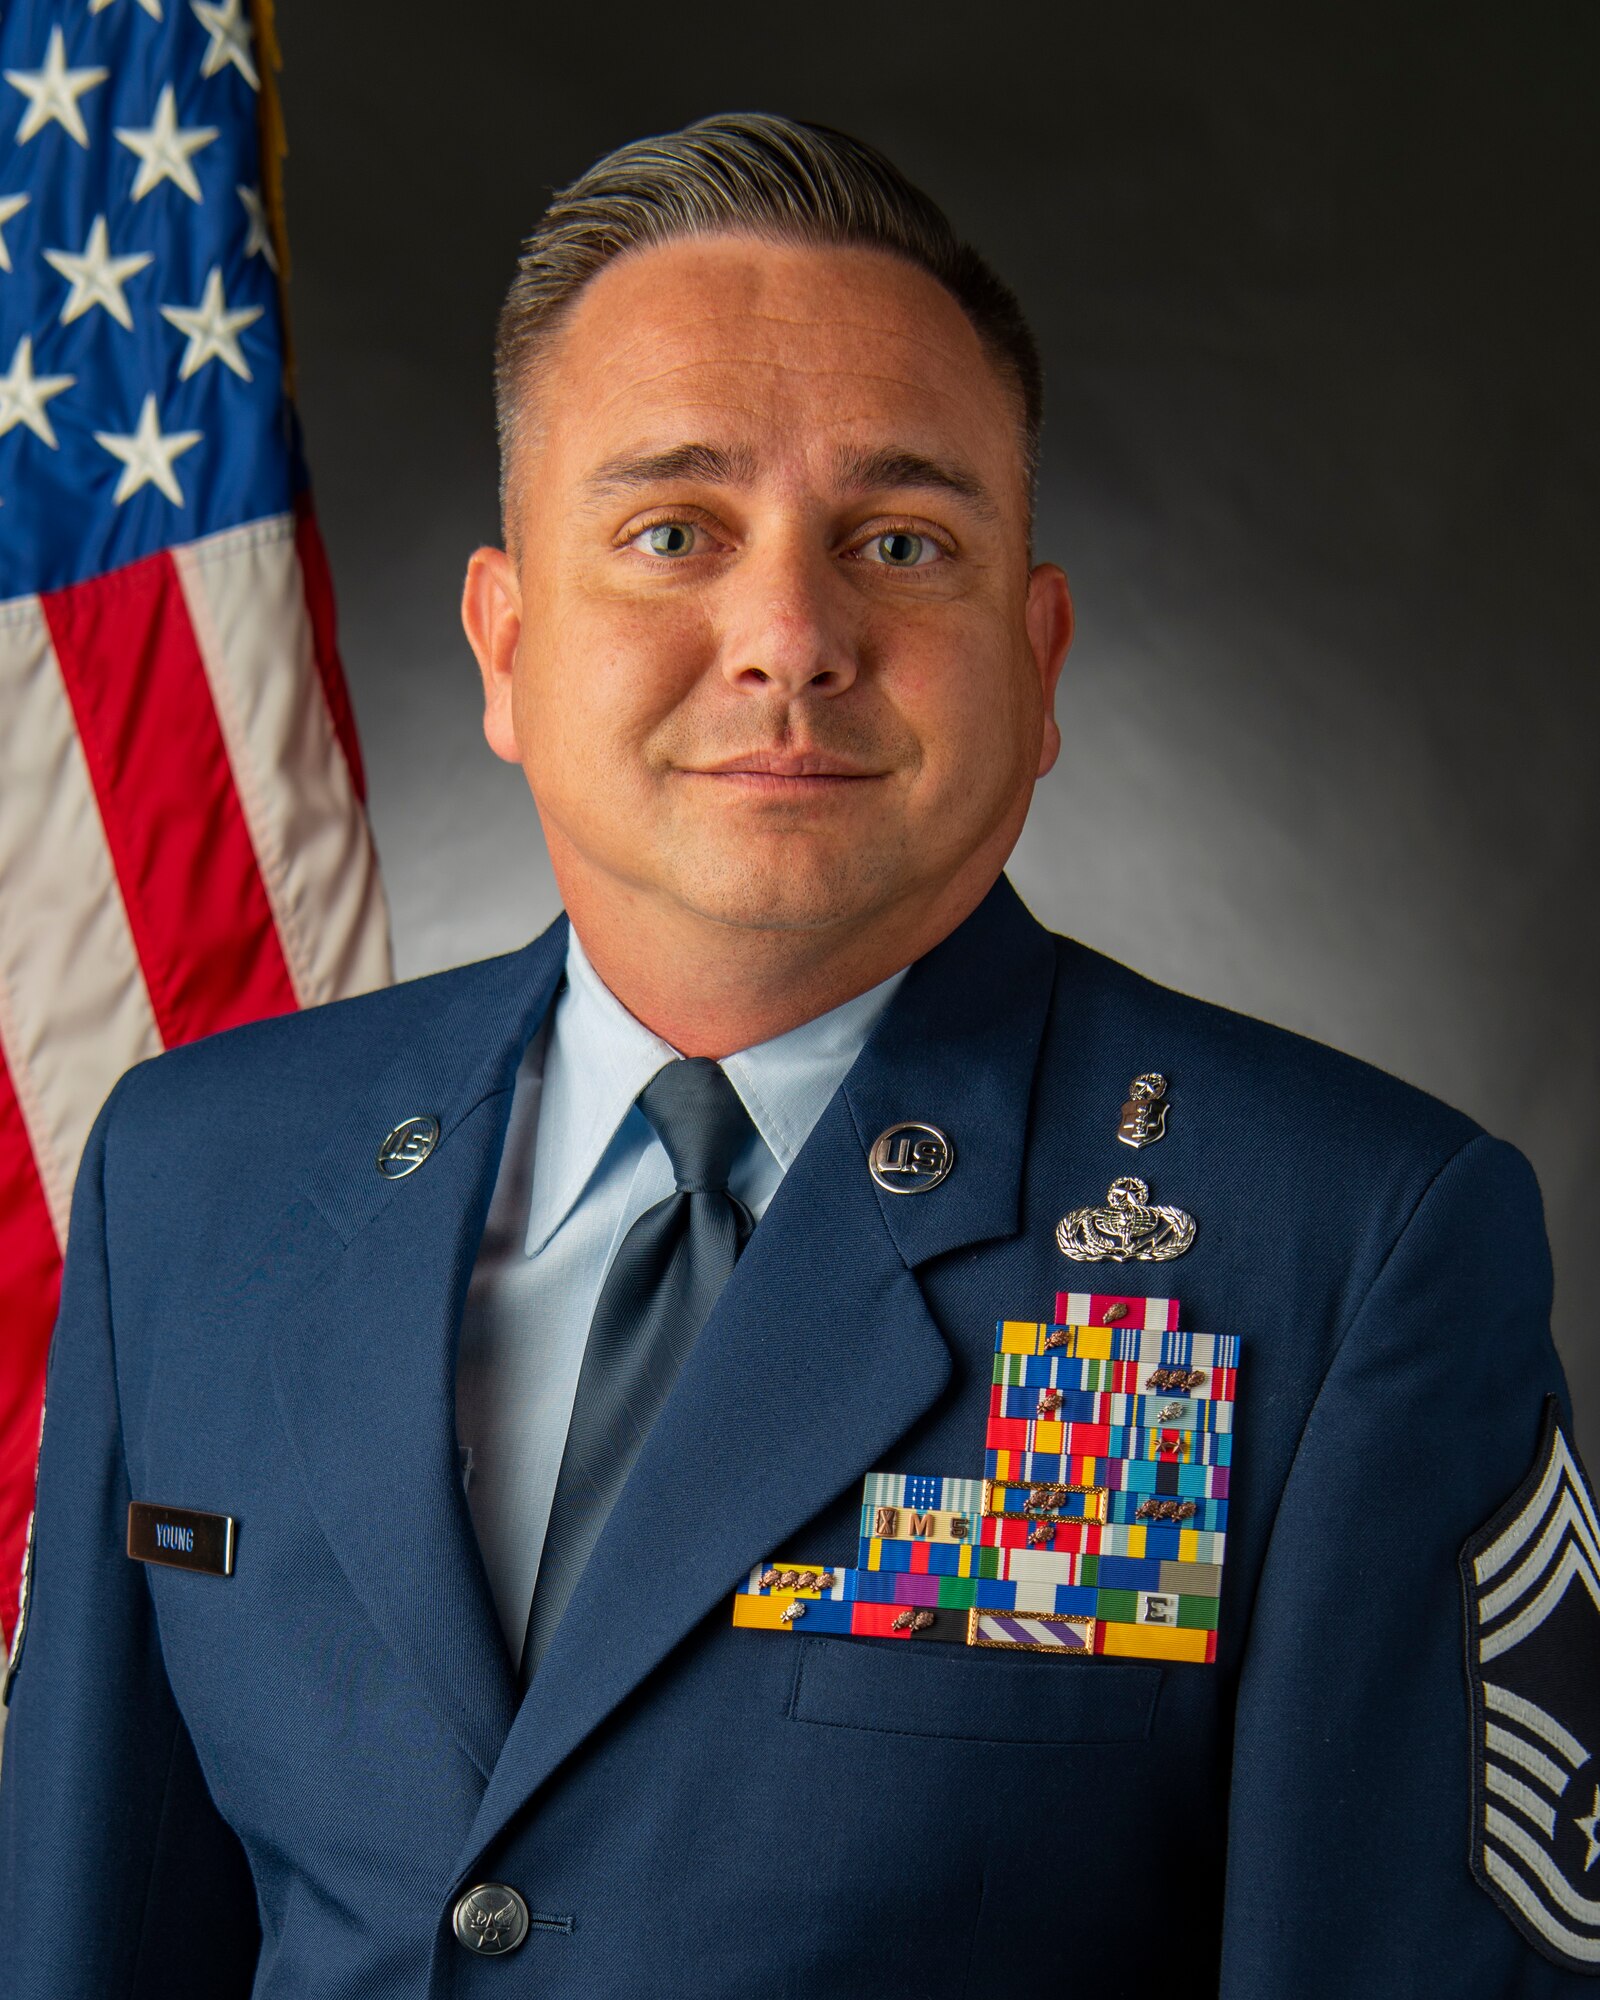 Official photo of Chief Master Sgt. Jason Young